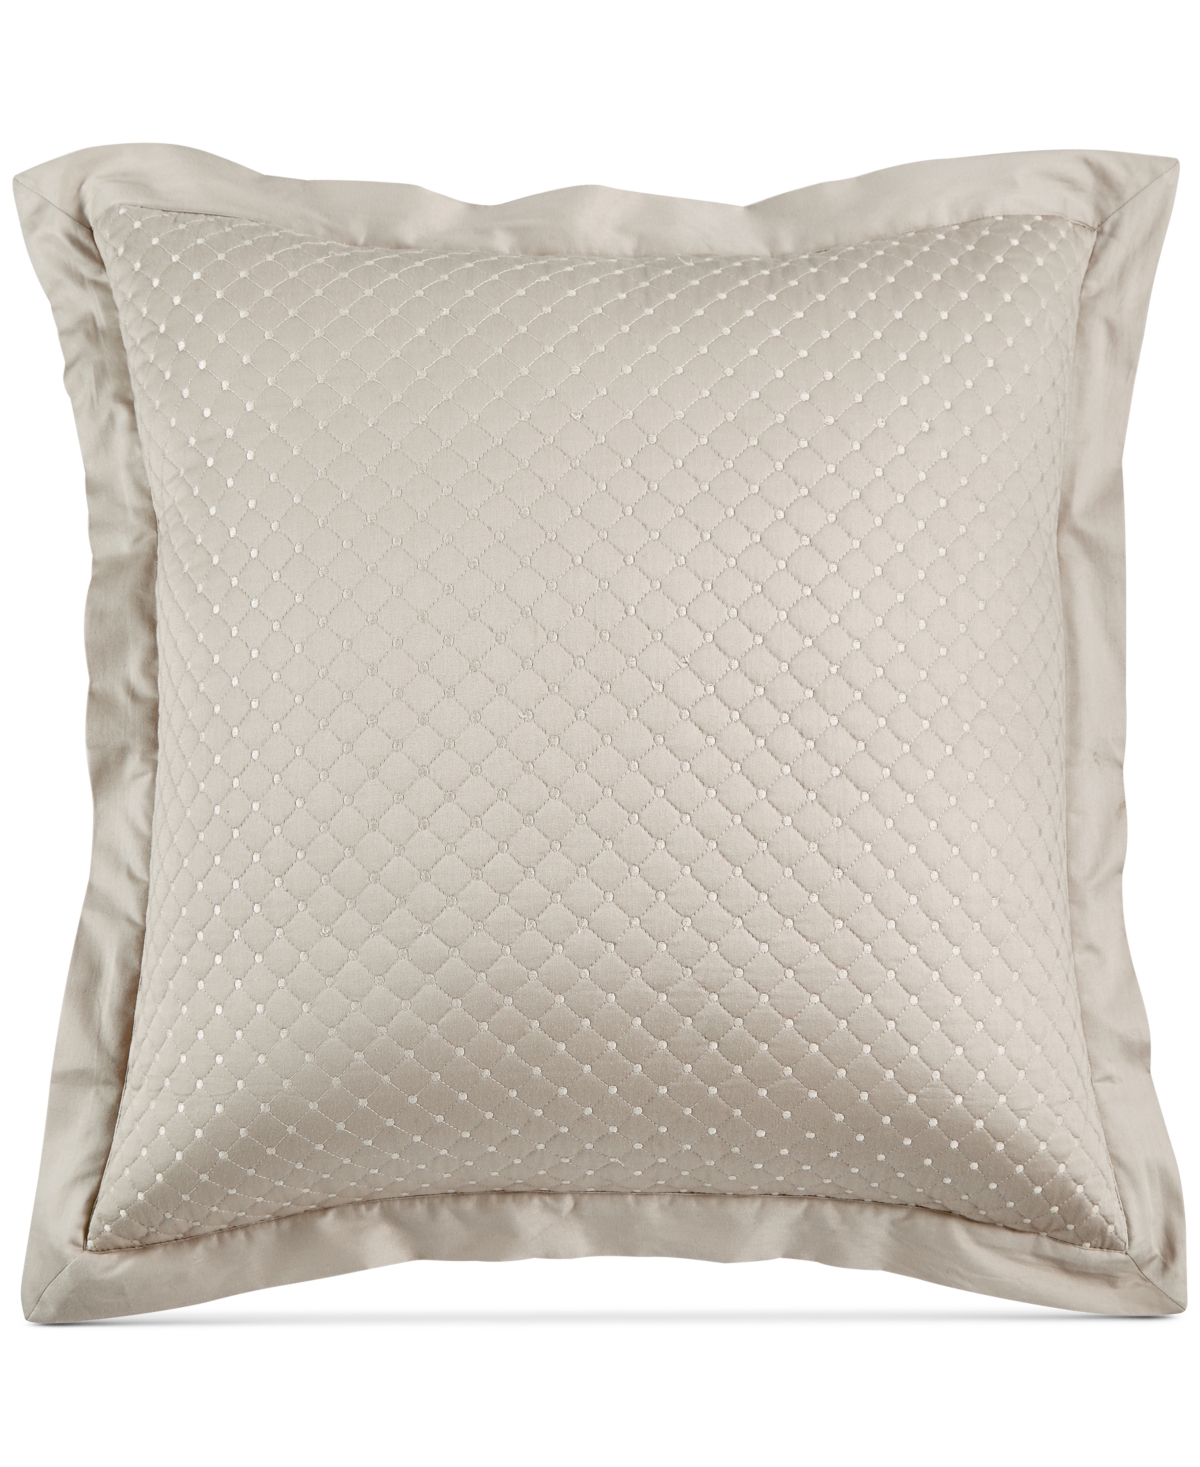 Damask Quilted Cotton Sham, European, Created for Macy's - Pistachio (Light Green)